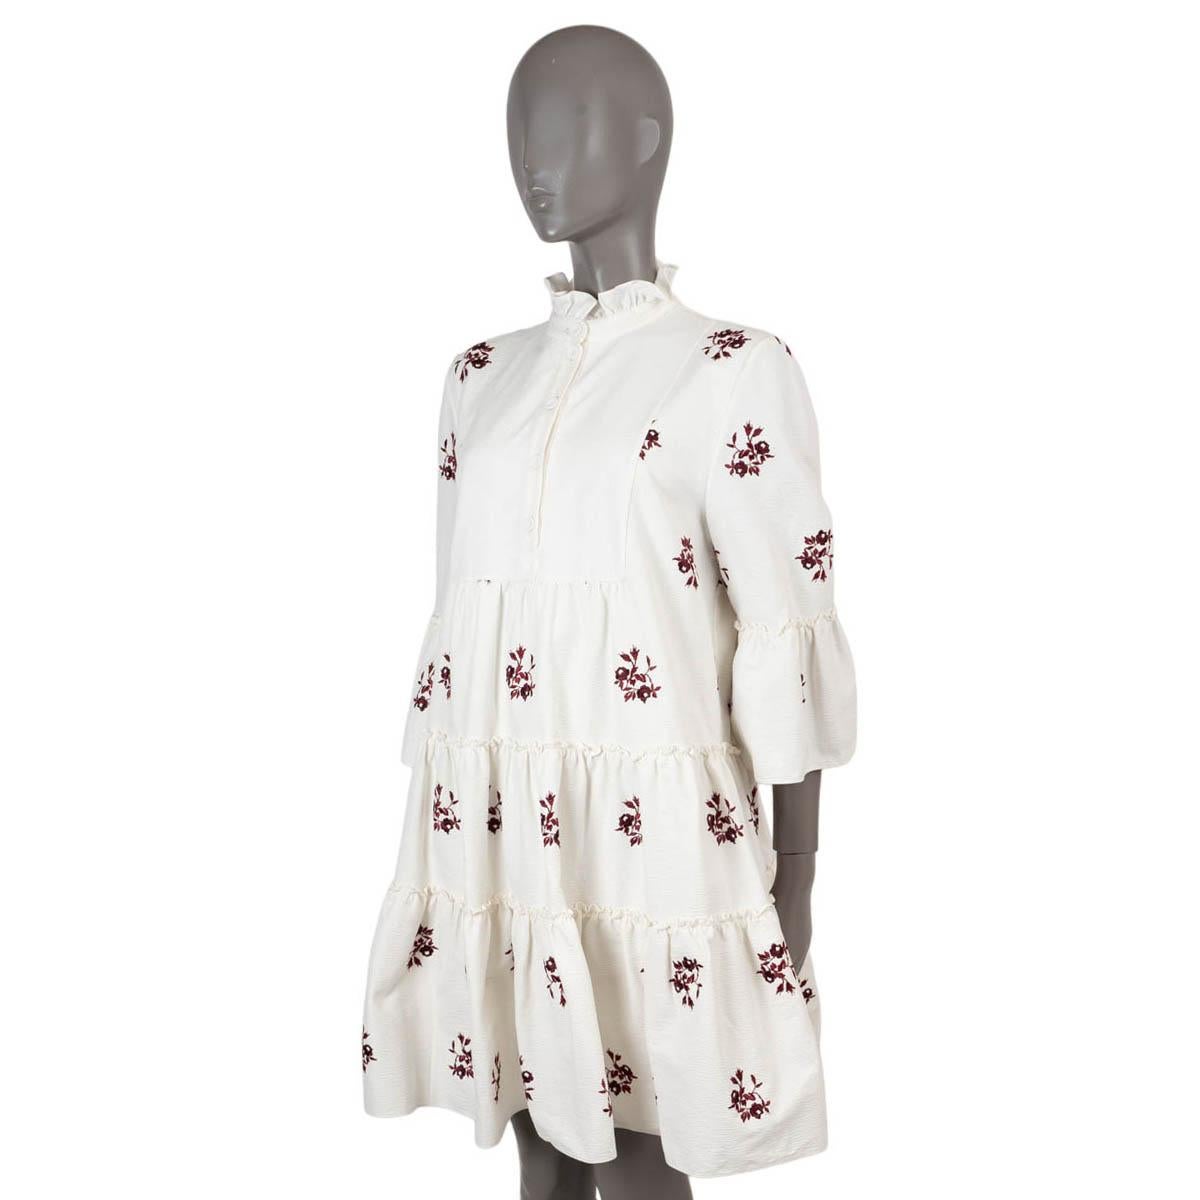 100% authentic Erdem Wyn tiered shirt dress in white cotton (99%) and elastane (1%). Features a ruffled mock neck, 3/4-sleeves, and red floral embroideries. Opens with four buttons on the front. Lined in cotton (100%). Has been worn and is in